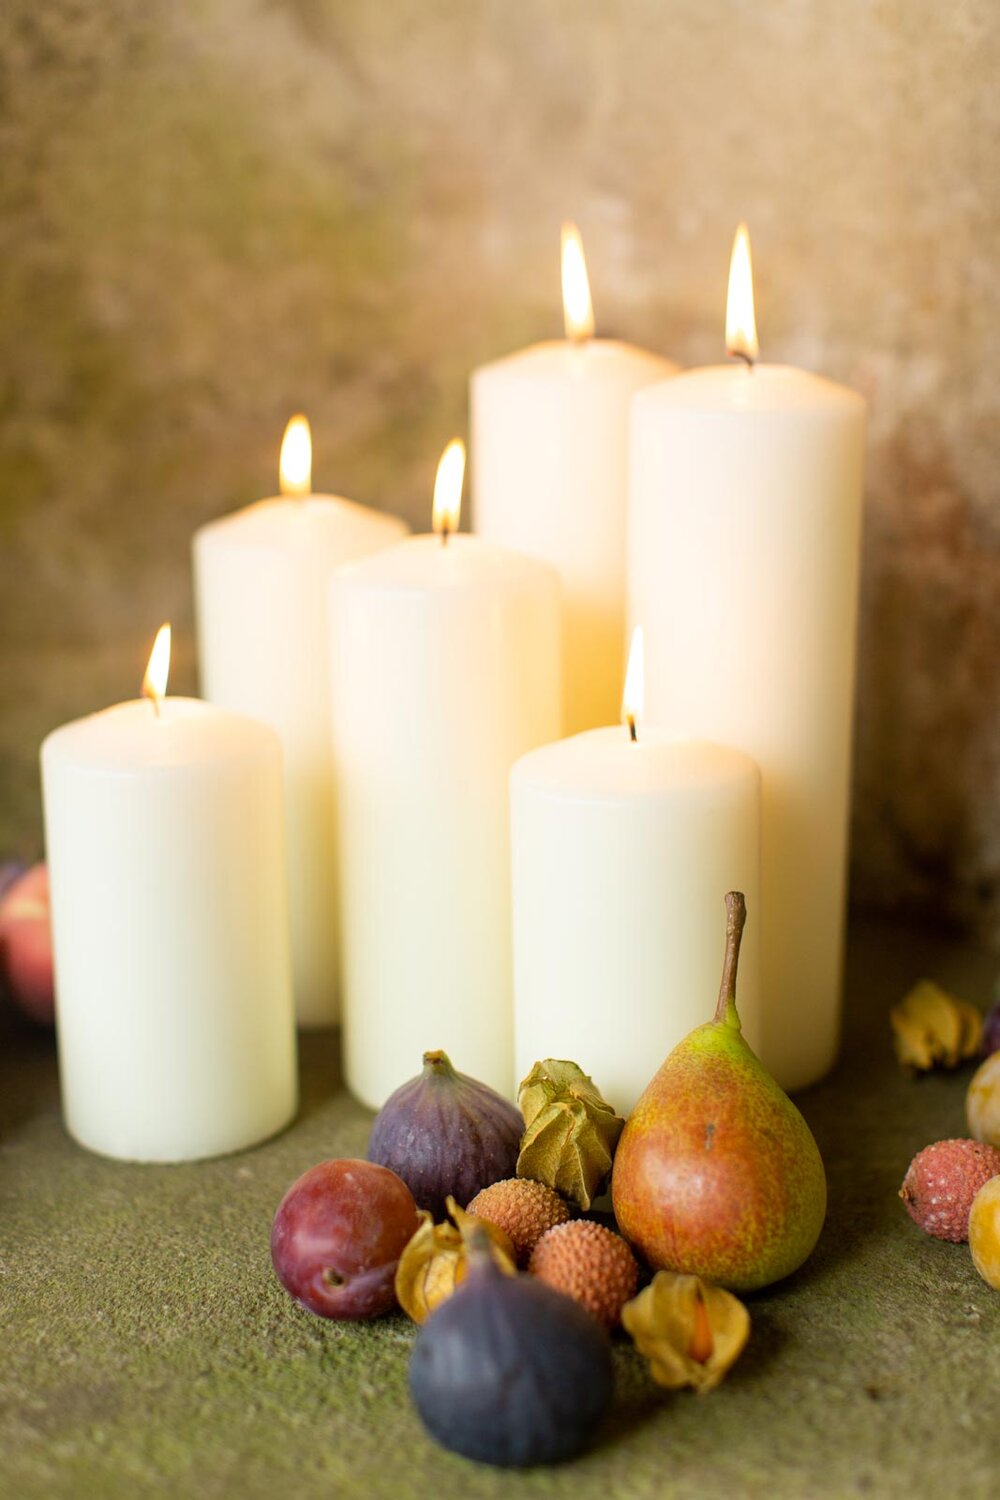 elegant-wedding-decor-with-fruits-and-lit-candles.jpg